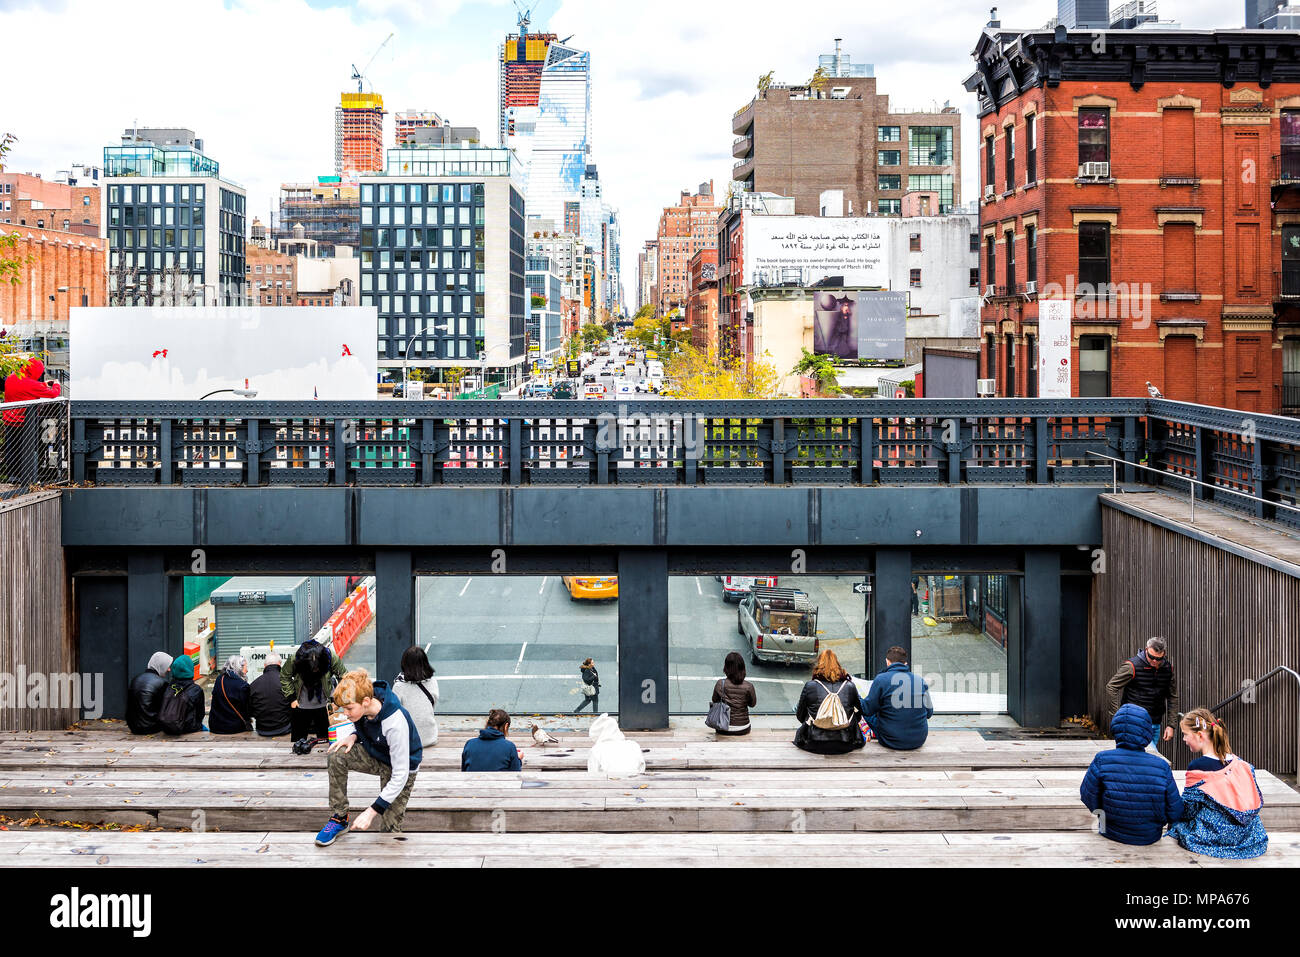 New York City, USA - October 30, 2017: Highline, high line, urban garden in NYC with many people tourists, sitting in Chelsea West Side by Hudson Yard Stock Photo